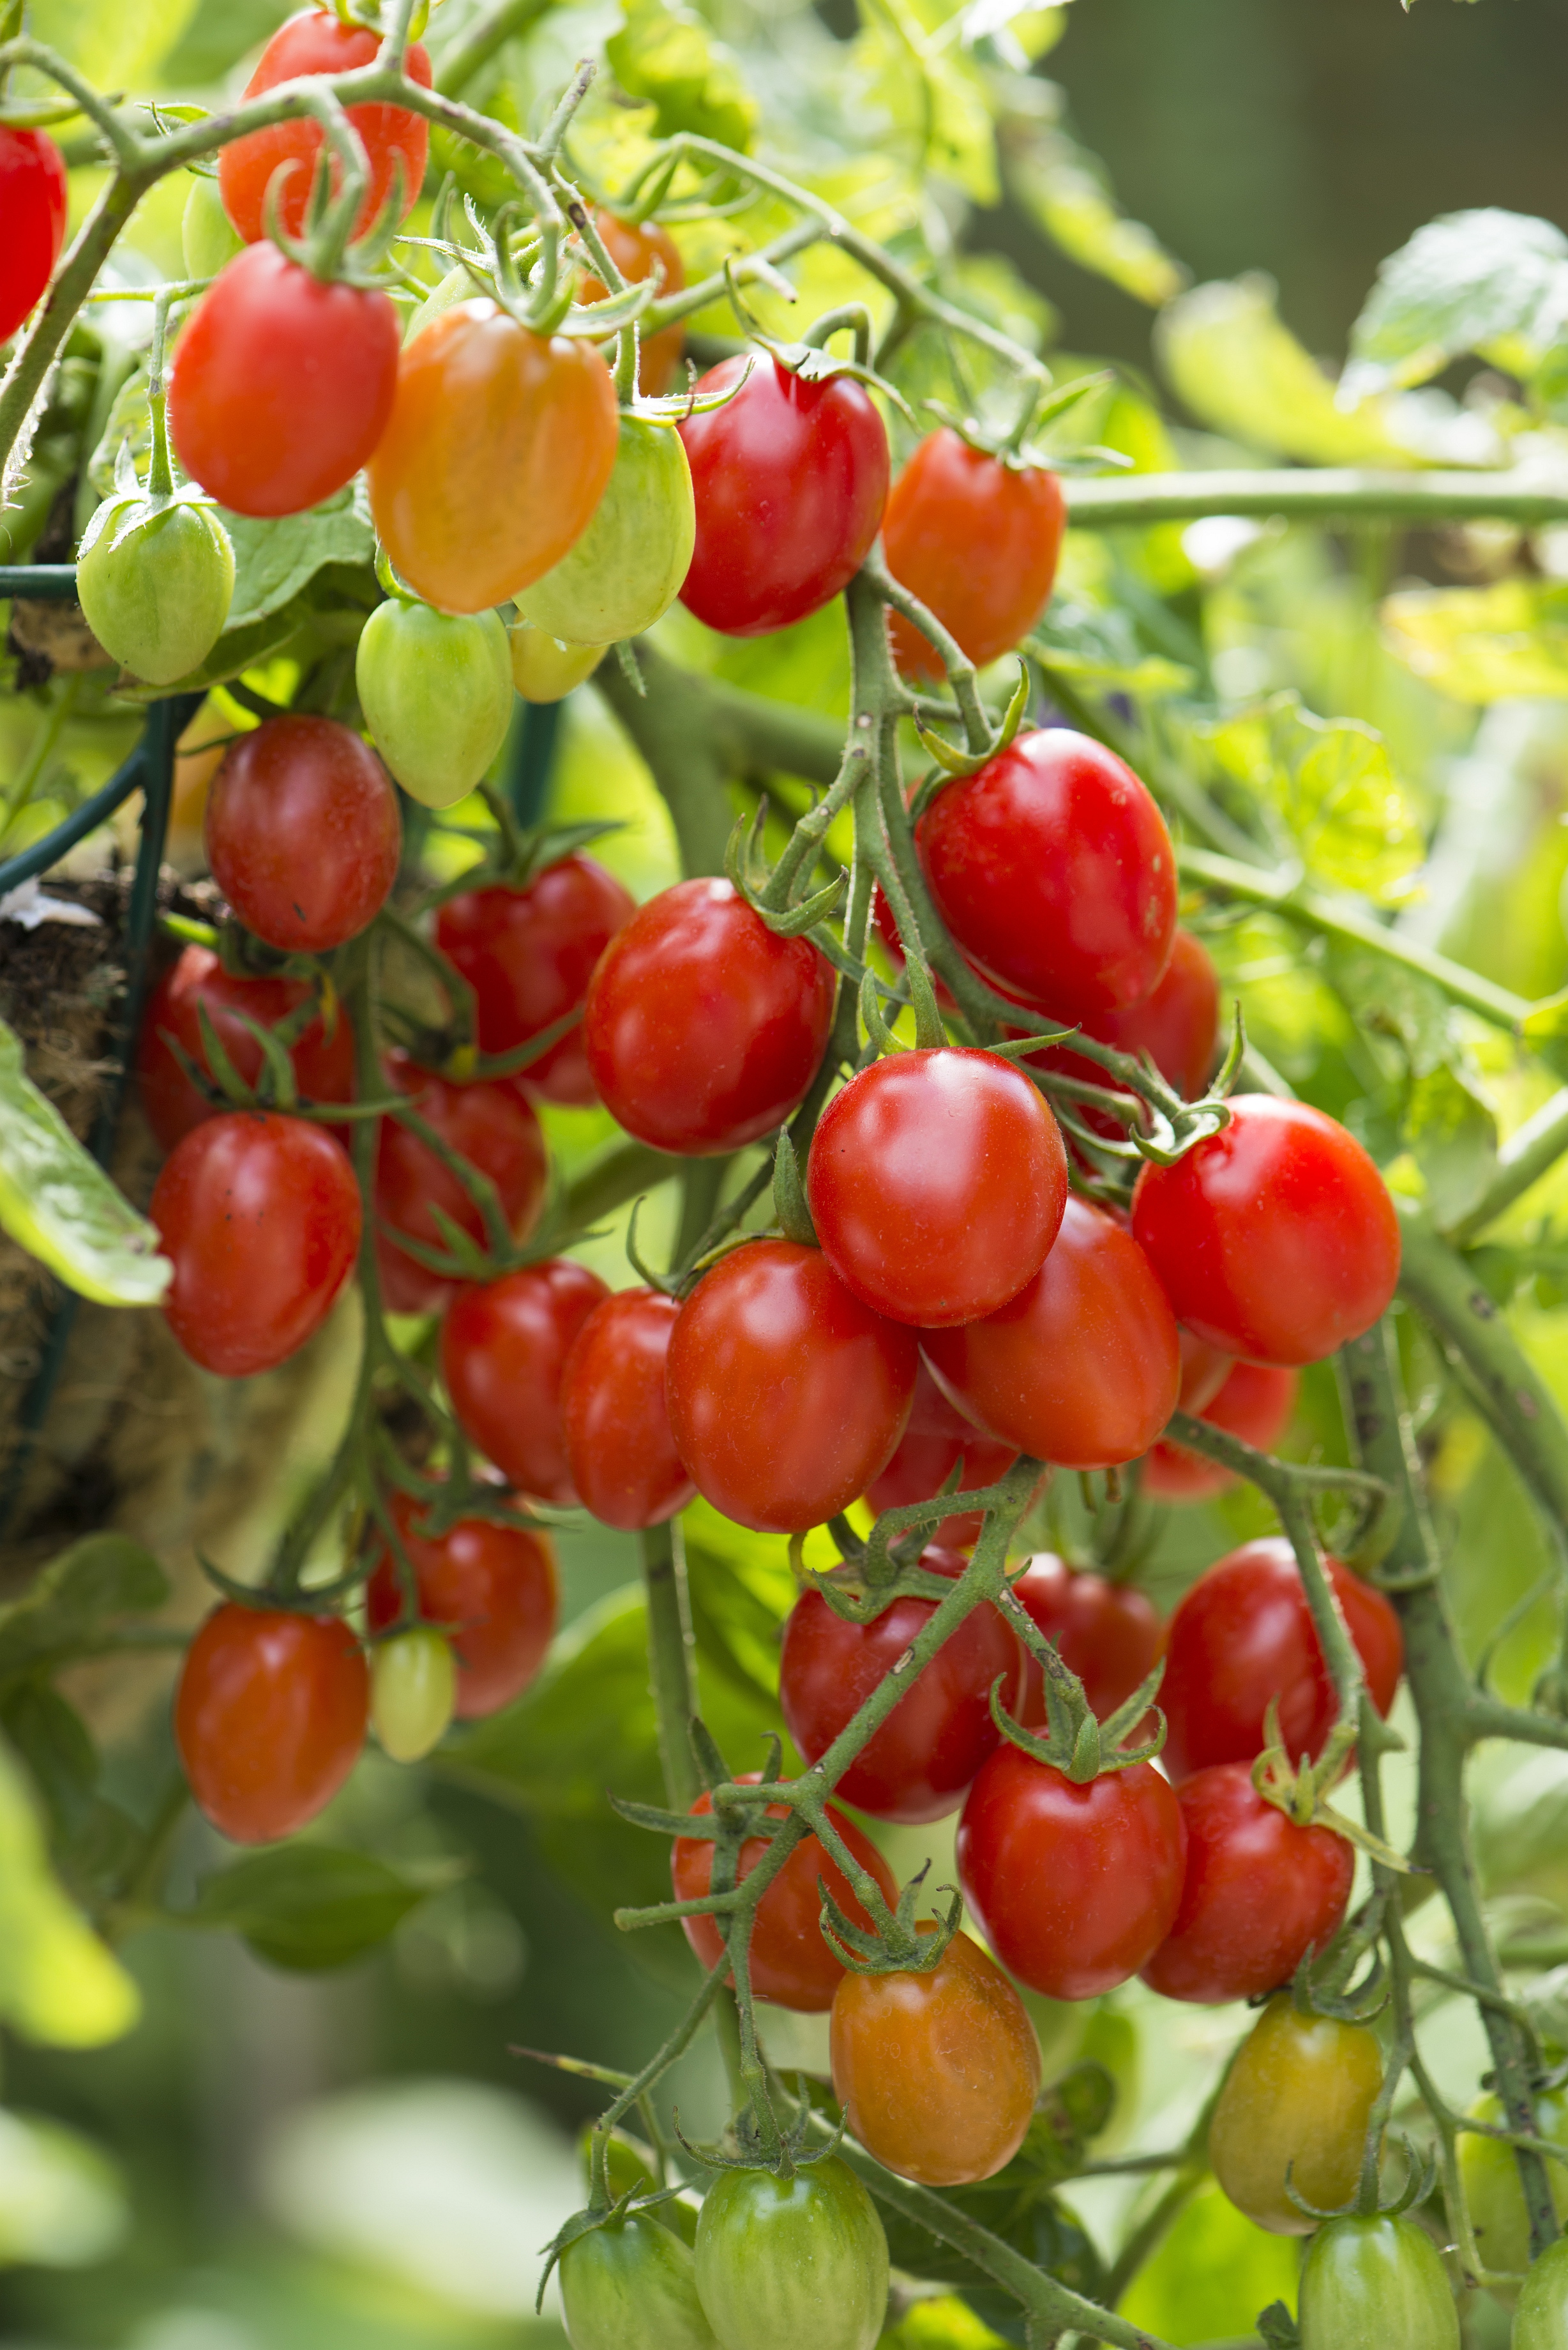 When selecting tomatoes to grow, look for varieties that ripen early, resist diseases and produce good yields. (Photo courtesy of  All-America Selections)